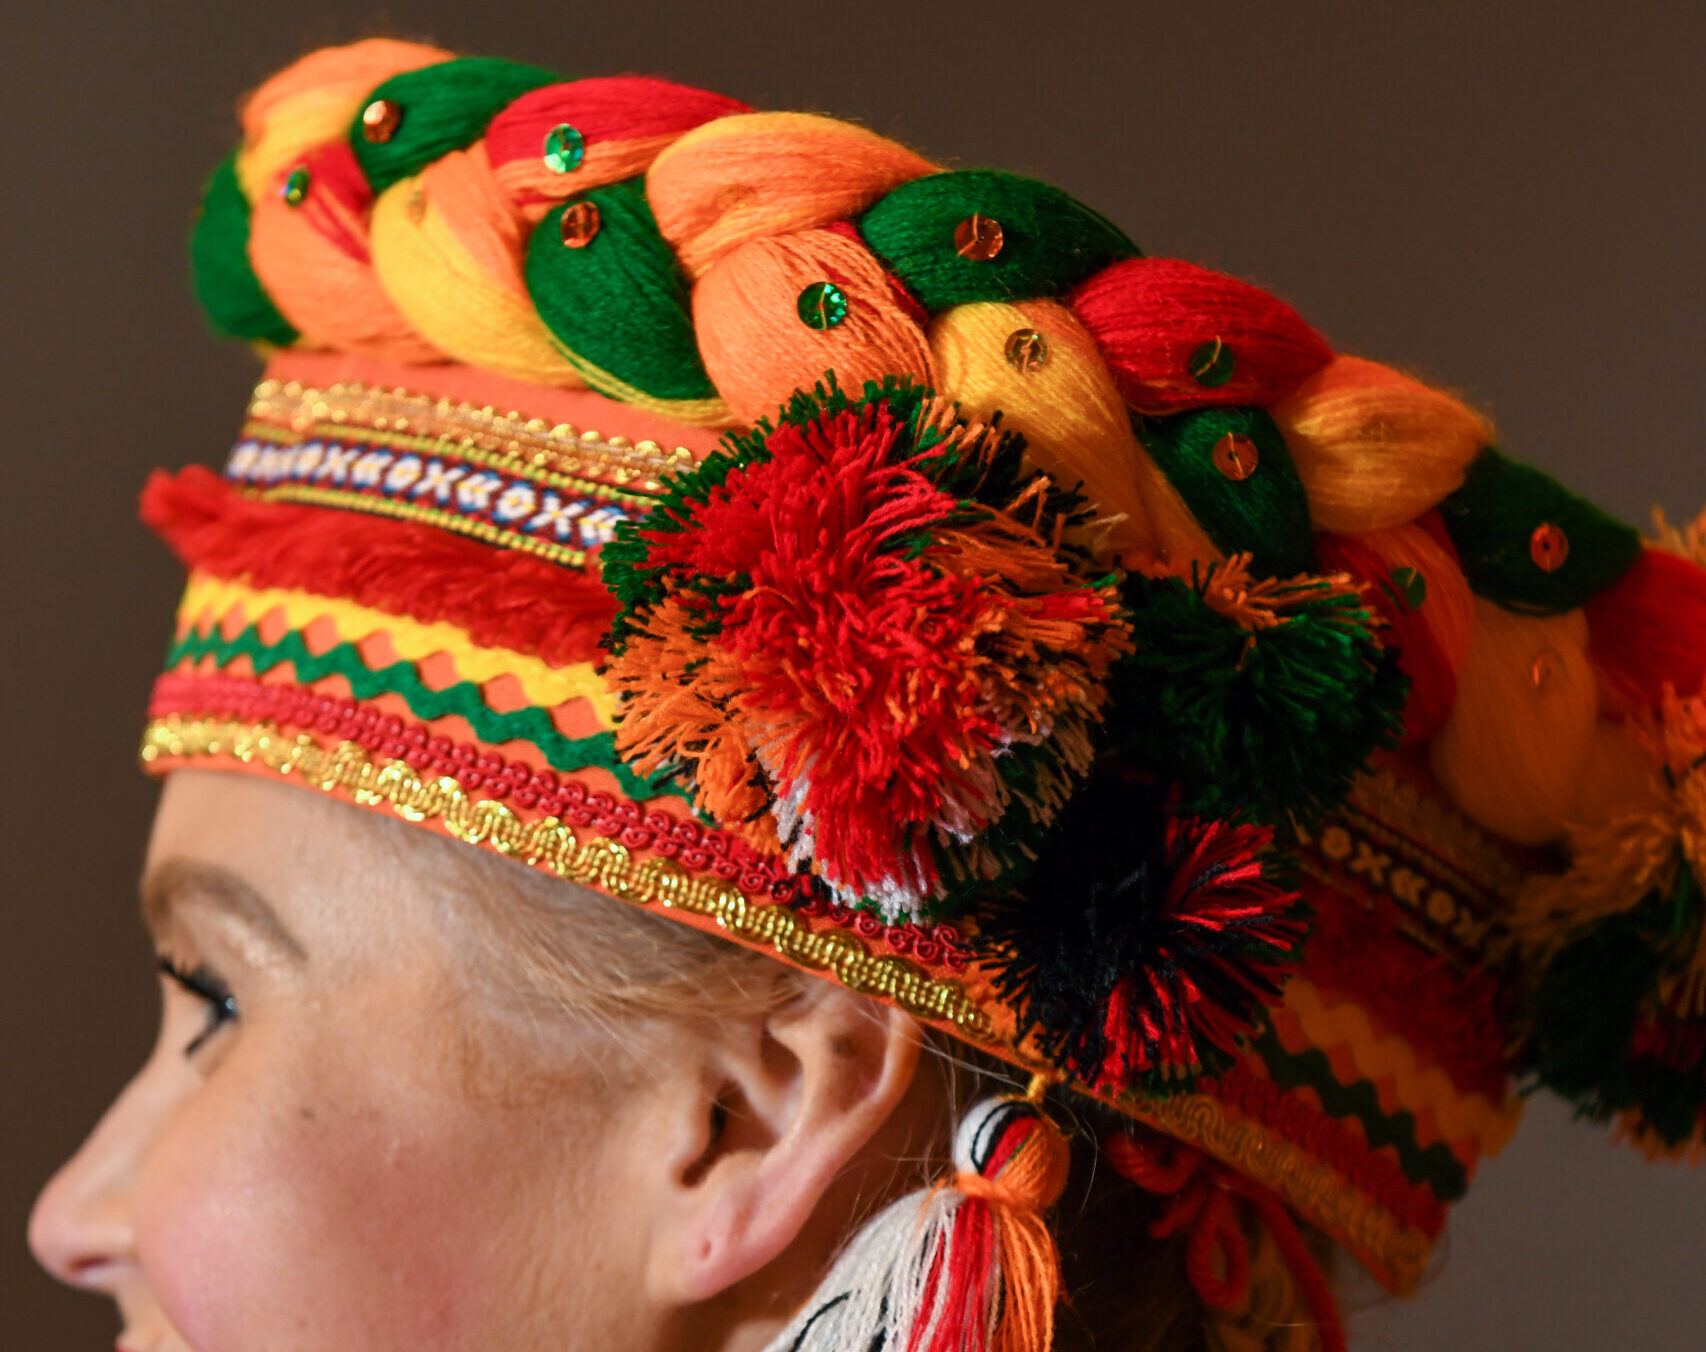 A hat made of bright orange, yellow, green, and red wool. Thick strands of wool are braided to make the top of the hat with rows of ribbon forming the piece around the forehead.